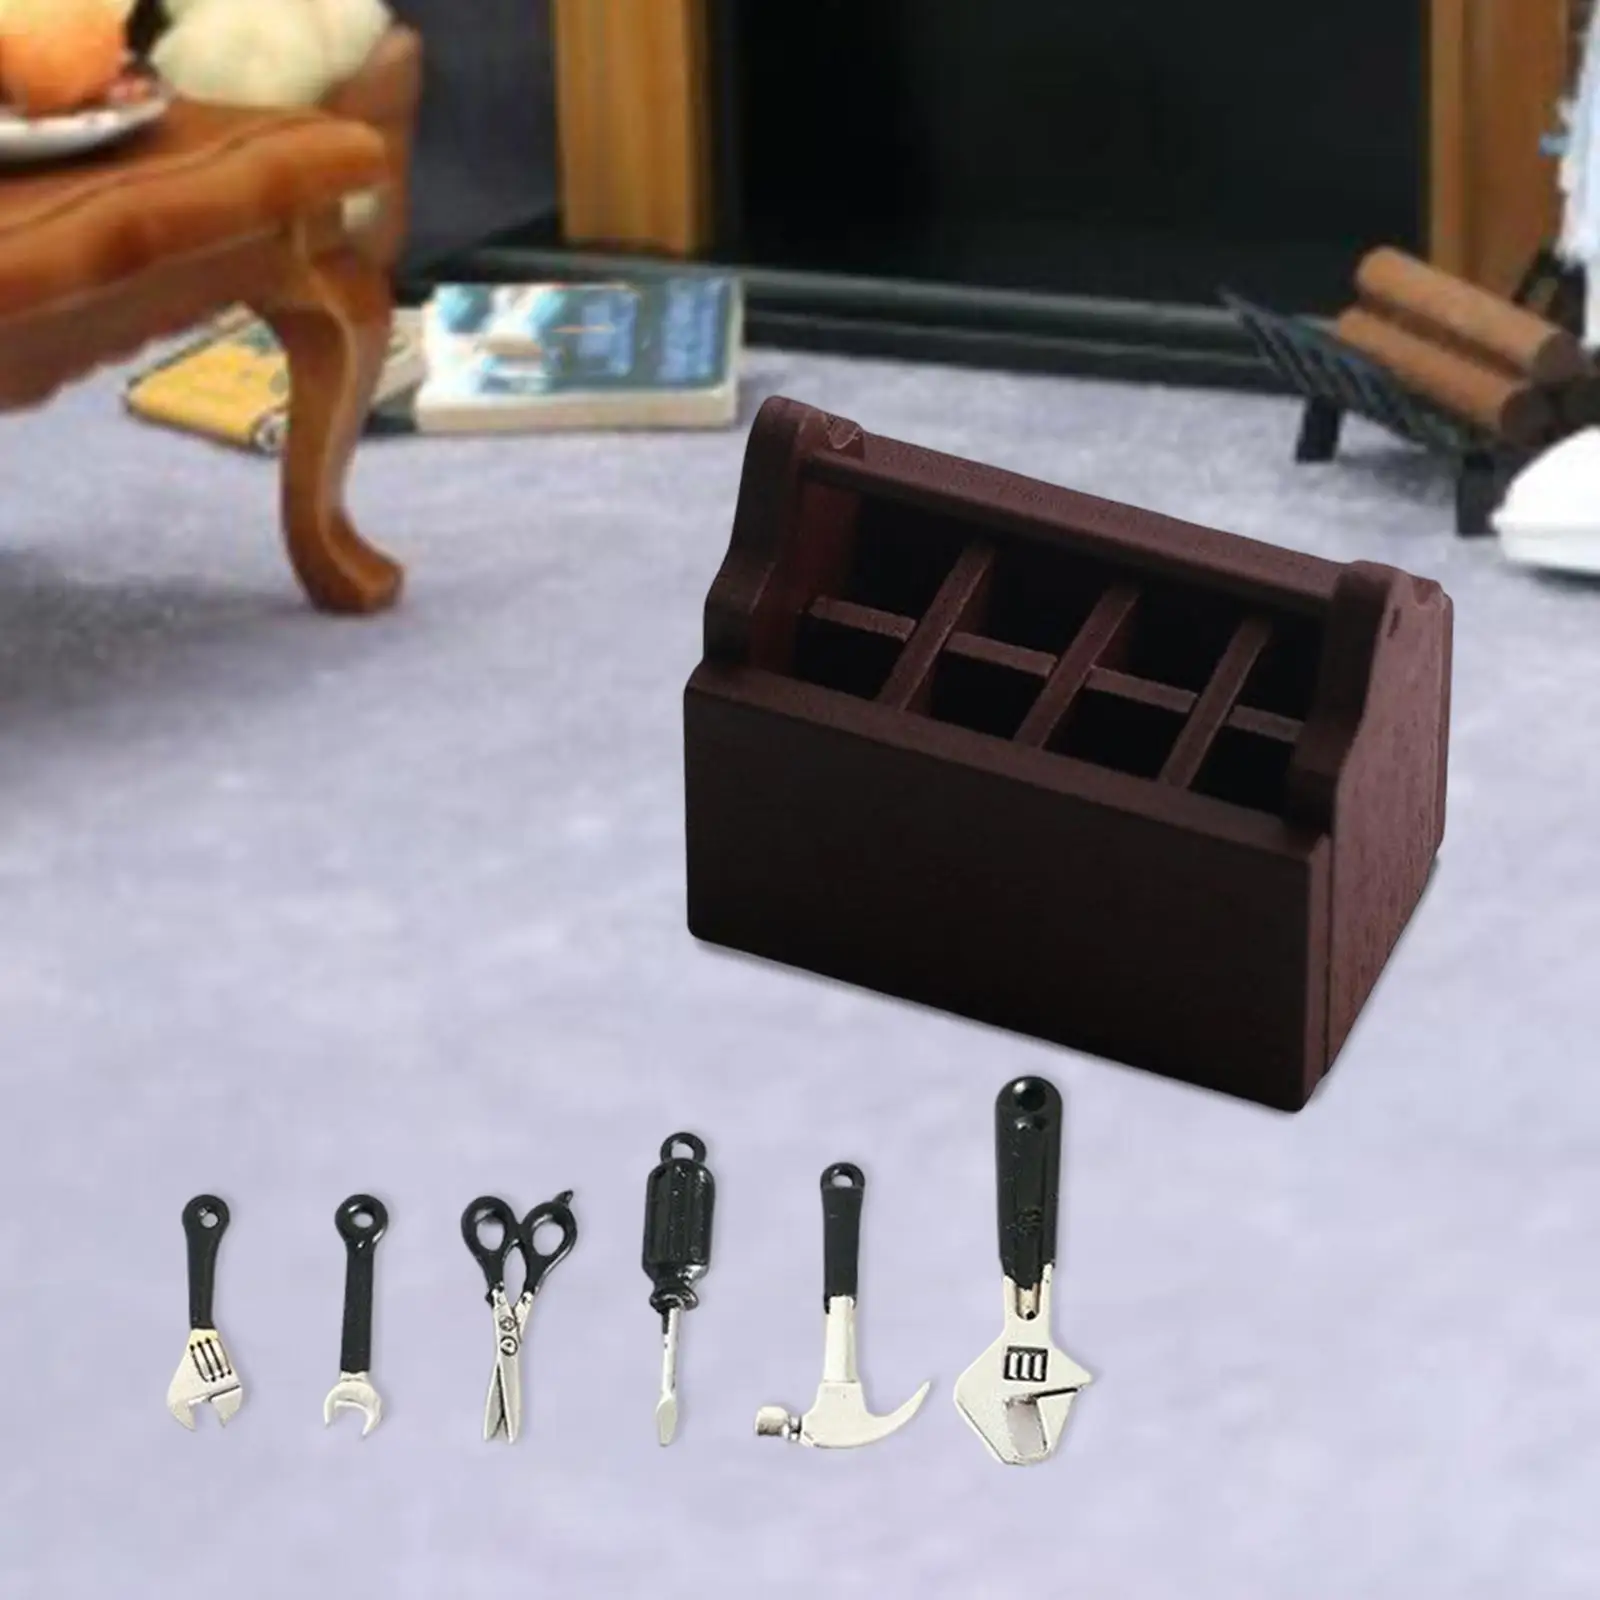 6Pcs Miniature Dollhouse Repair Tools with Storage Case Dollhouse Decor Accessory Life Scene Living Room 1:12 for Girls Gifts